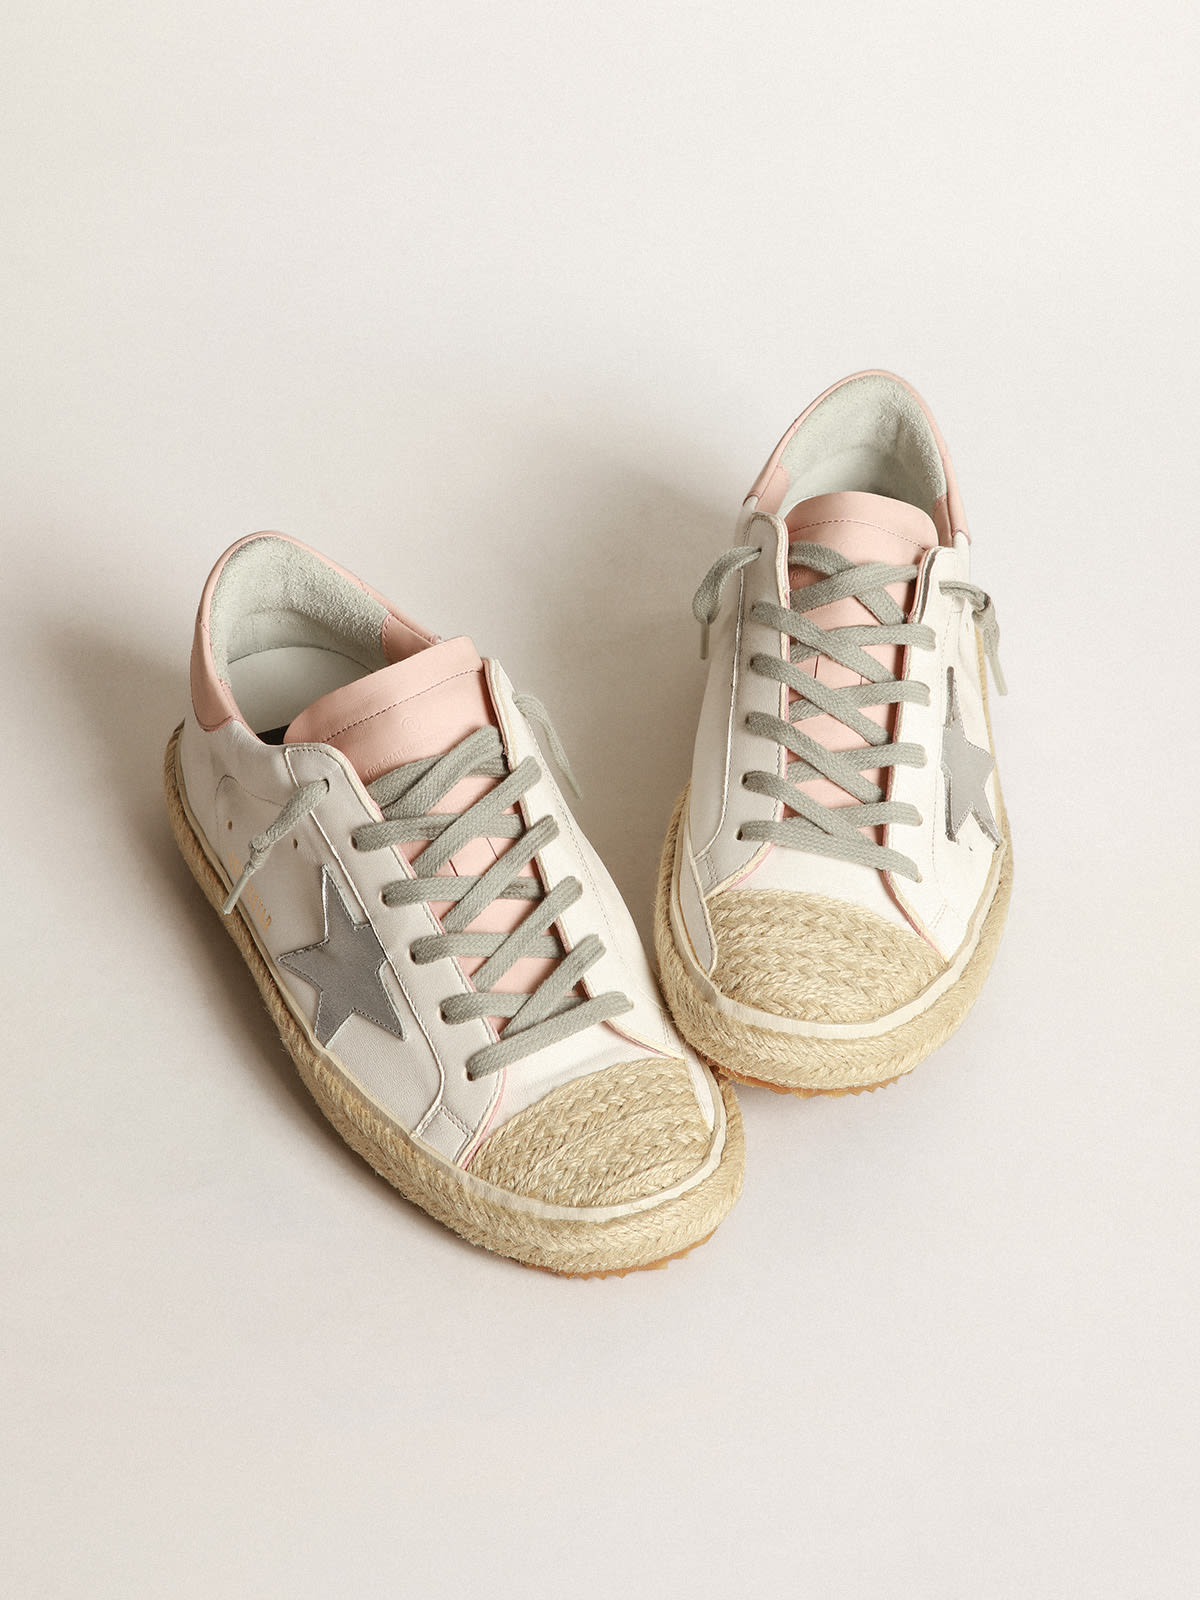 Golden Goose - Super-Star sneakers with rope toe and pink leather tongue in 